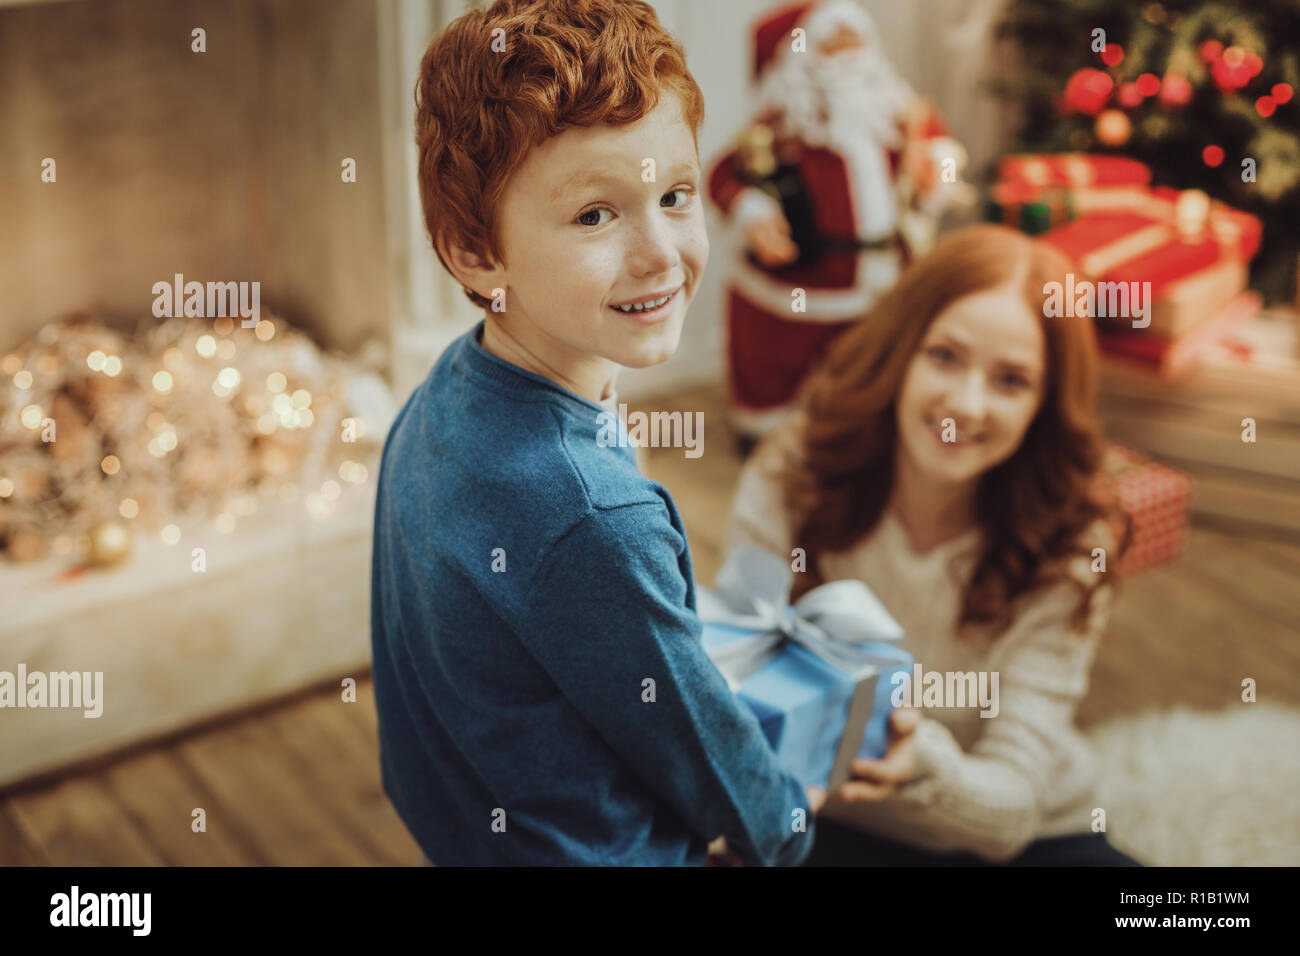 Handsome boy celebrating Christmas with his mommy Stock Photo